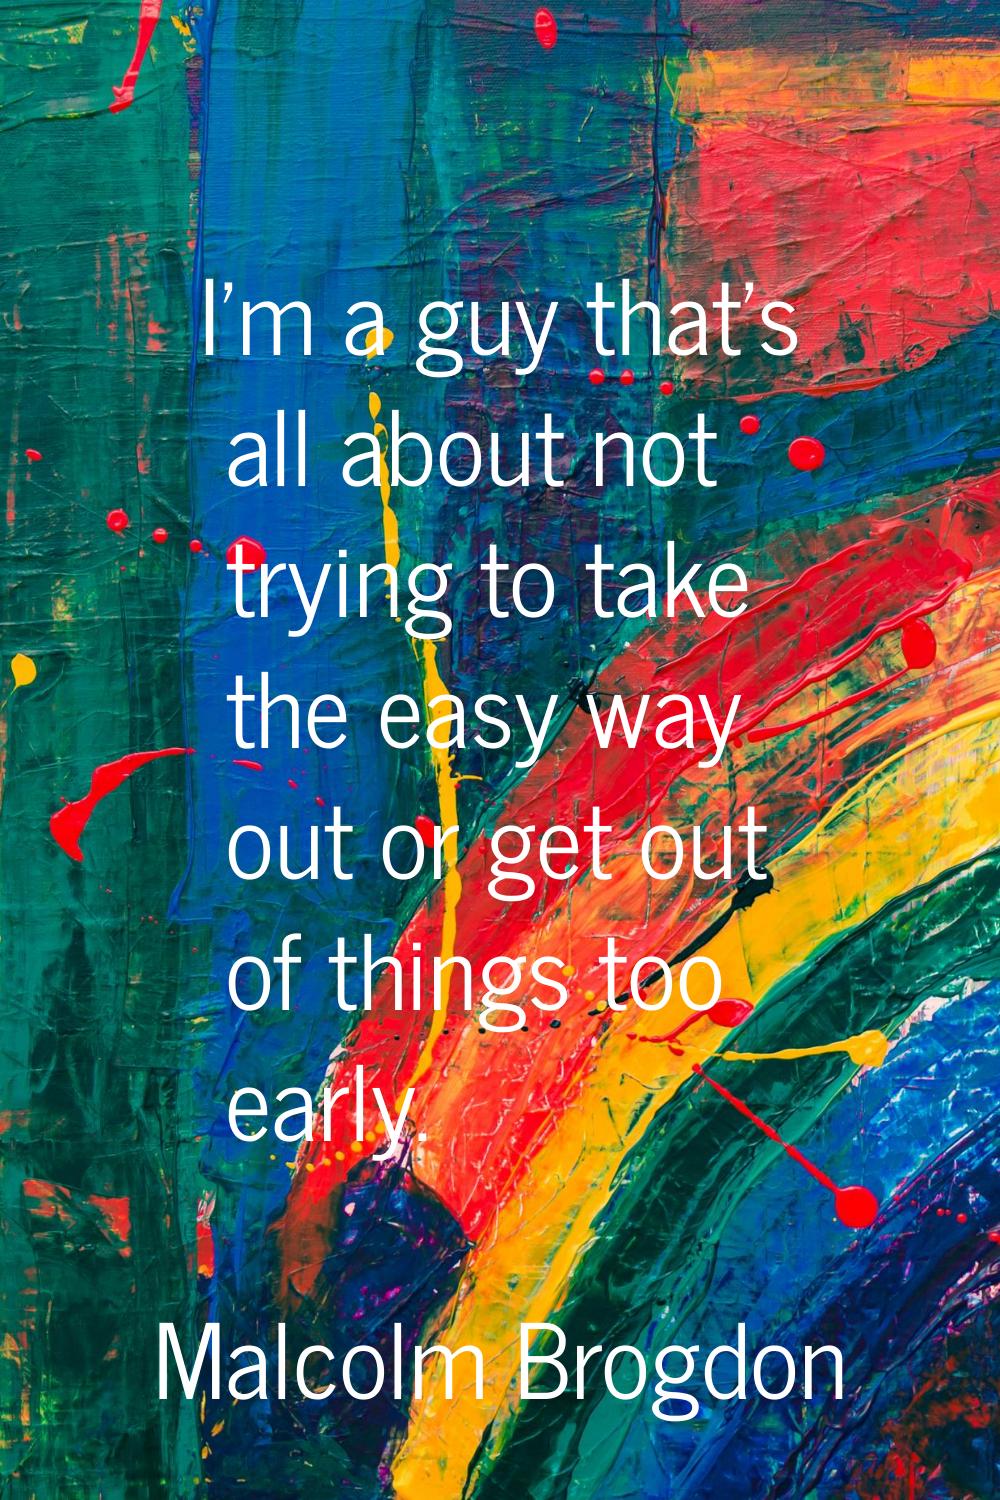 I'm a guy that's all about not trying to take the easy way out or get out of things too early.